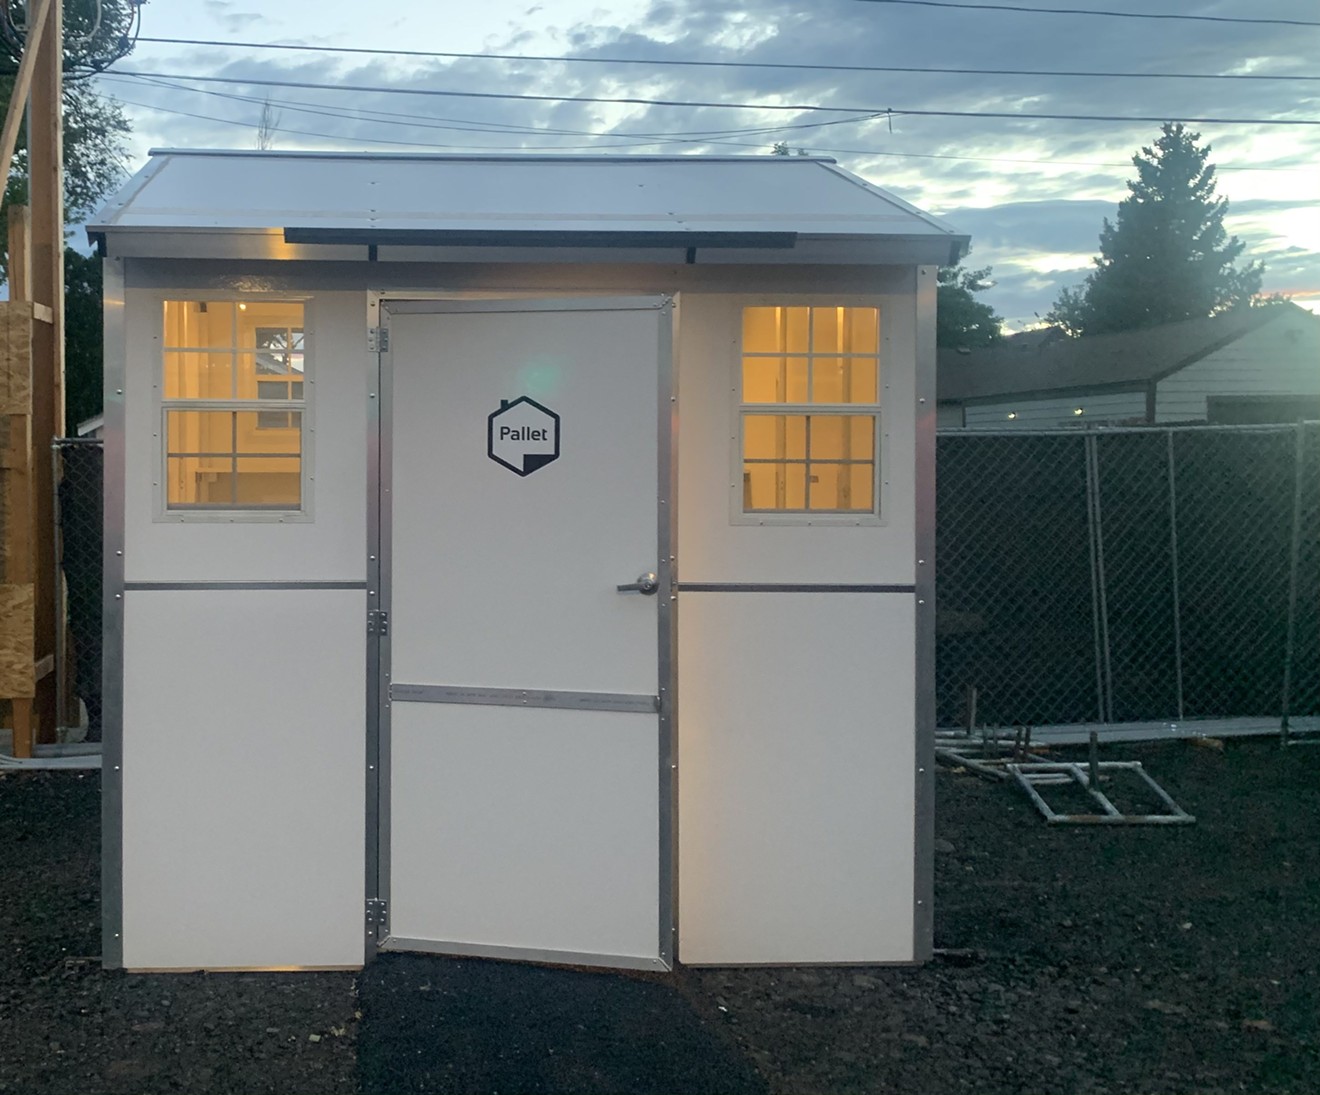 The pallet shelter includes lighting and electric outlets.